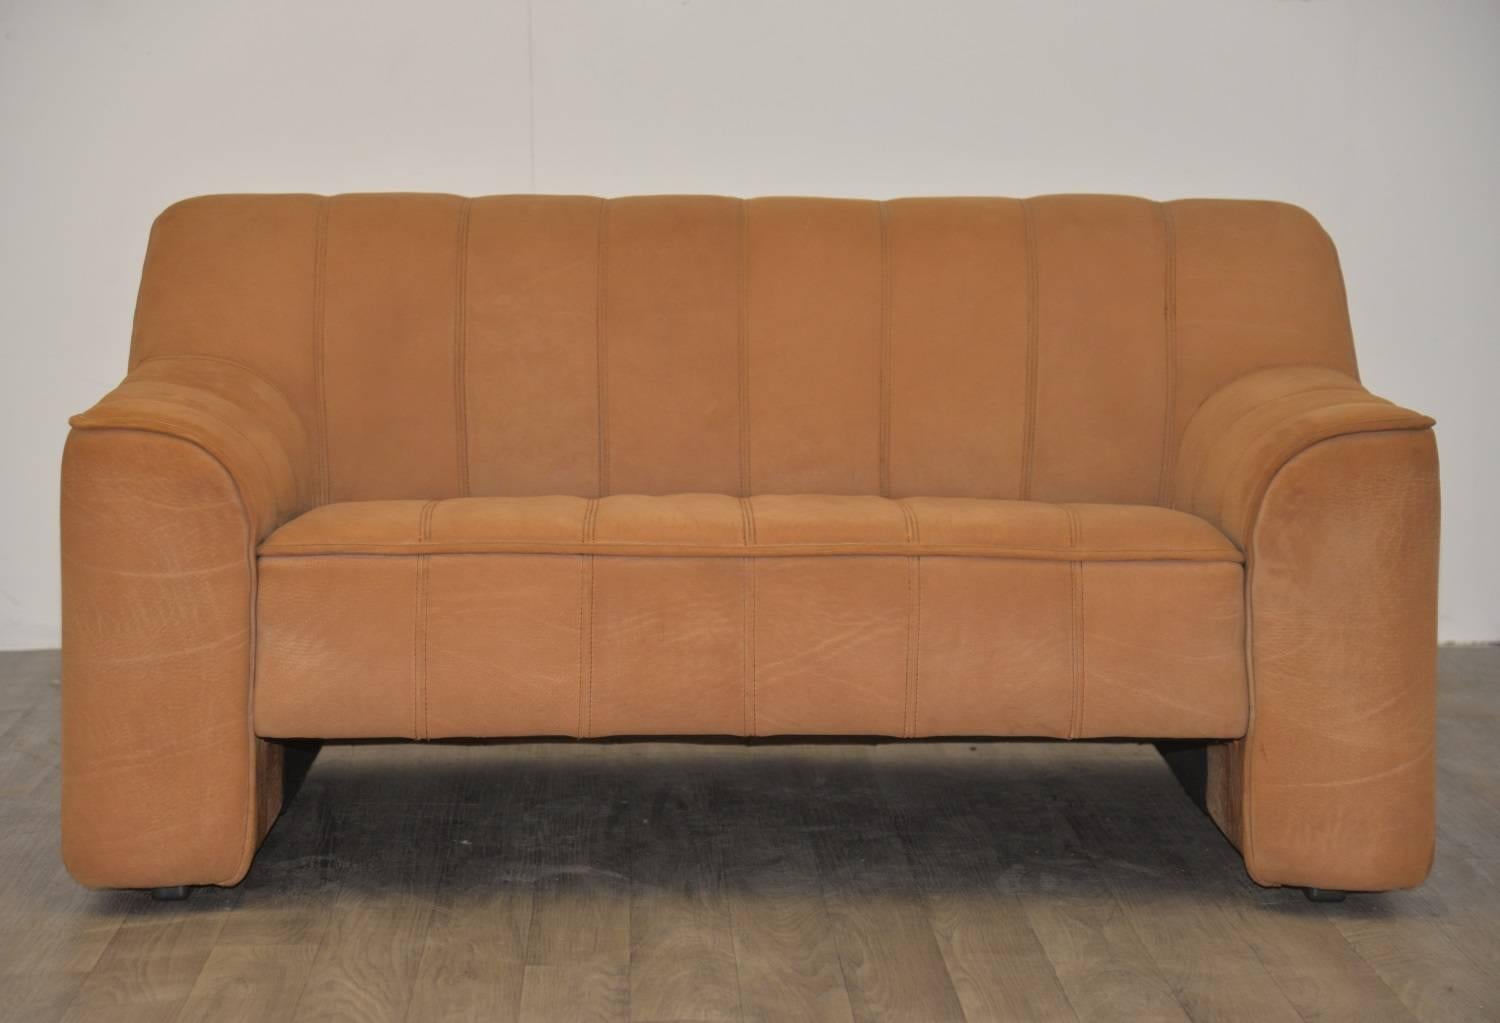 Discounted airfreight for our US Continent customers (2 weeks door to door)
Try before you buy service for our UK mainland customers
Returns accepted 

Matching pair of vintage De Sede DS 44 three-seat sofa and loveseat in thick buffalo leather.